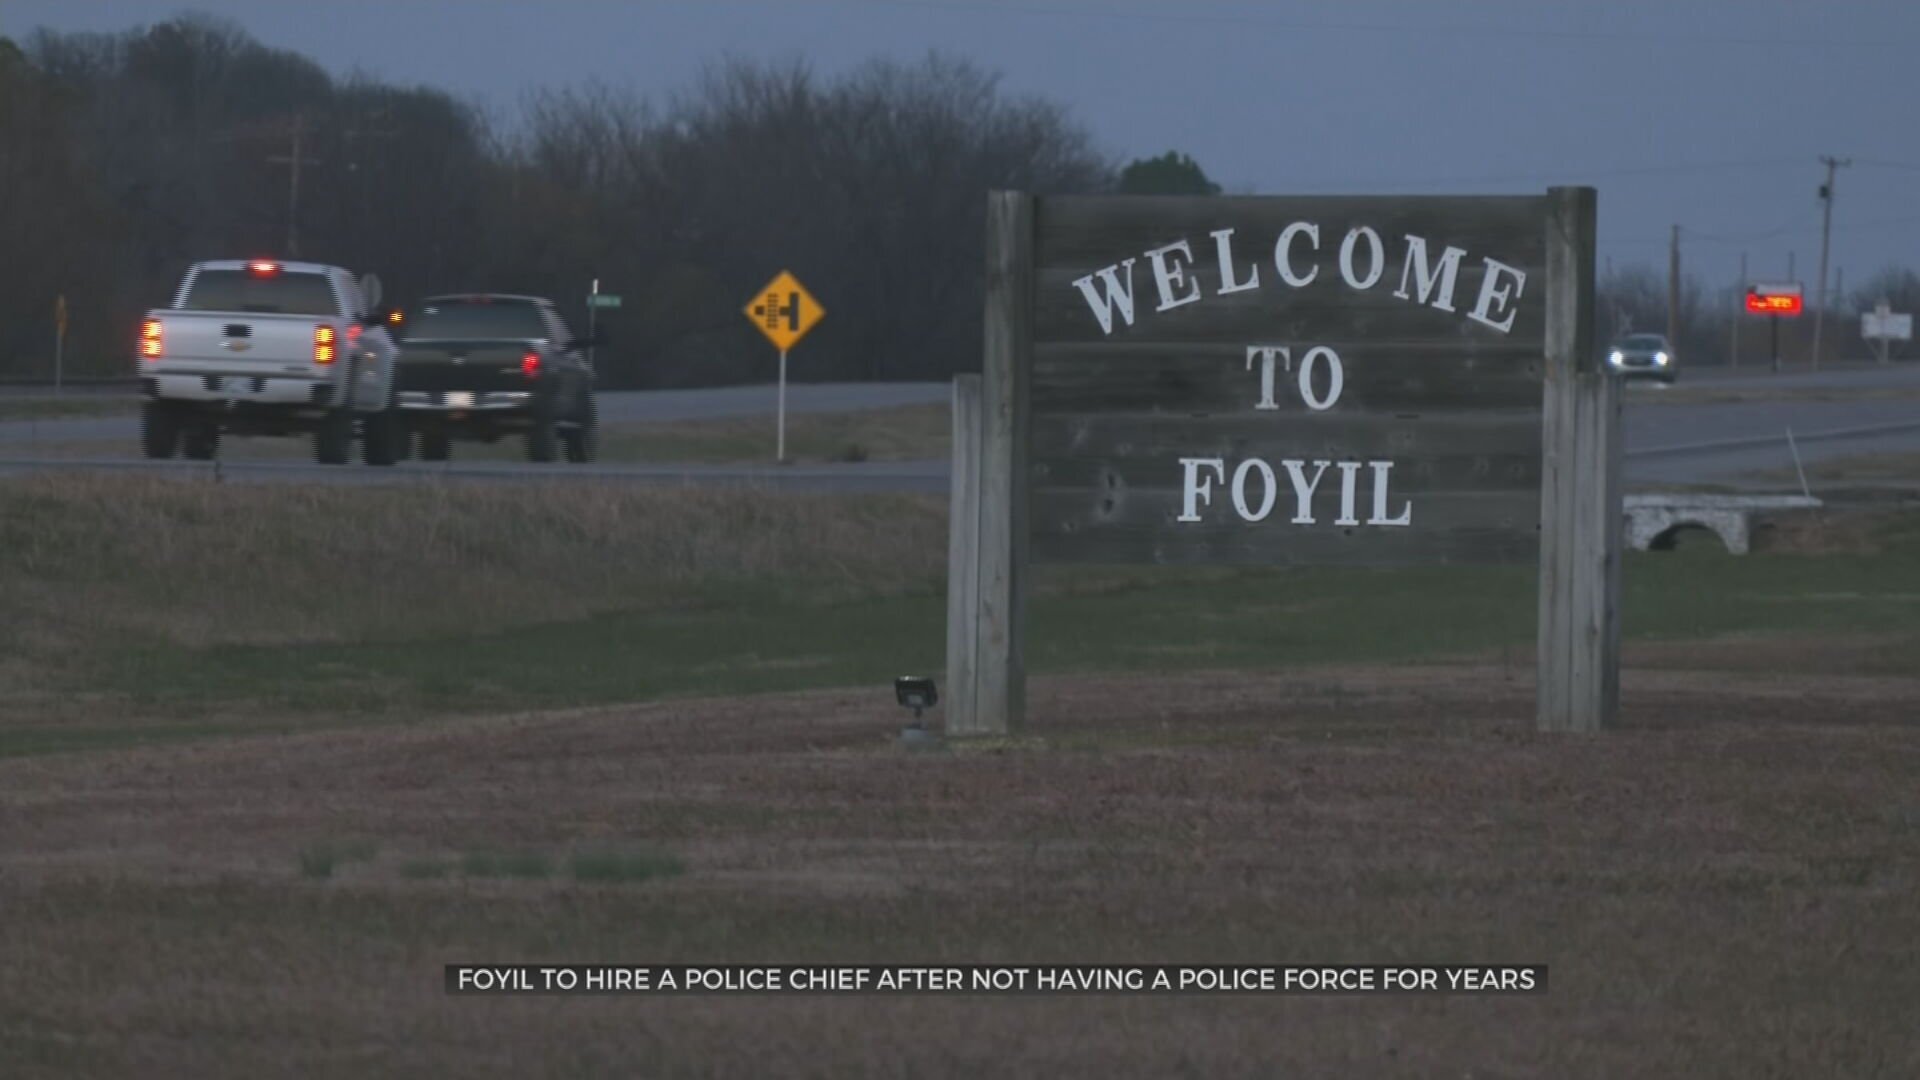 After Years Without Police Force, Foyil To Hire Police Chief 